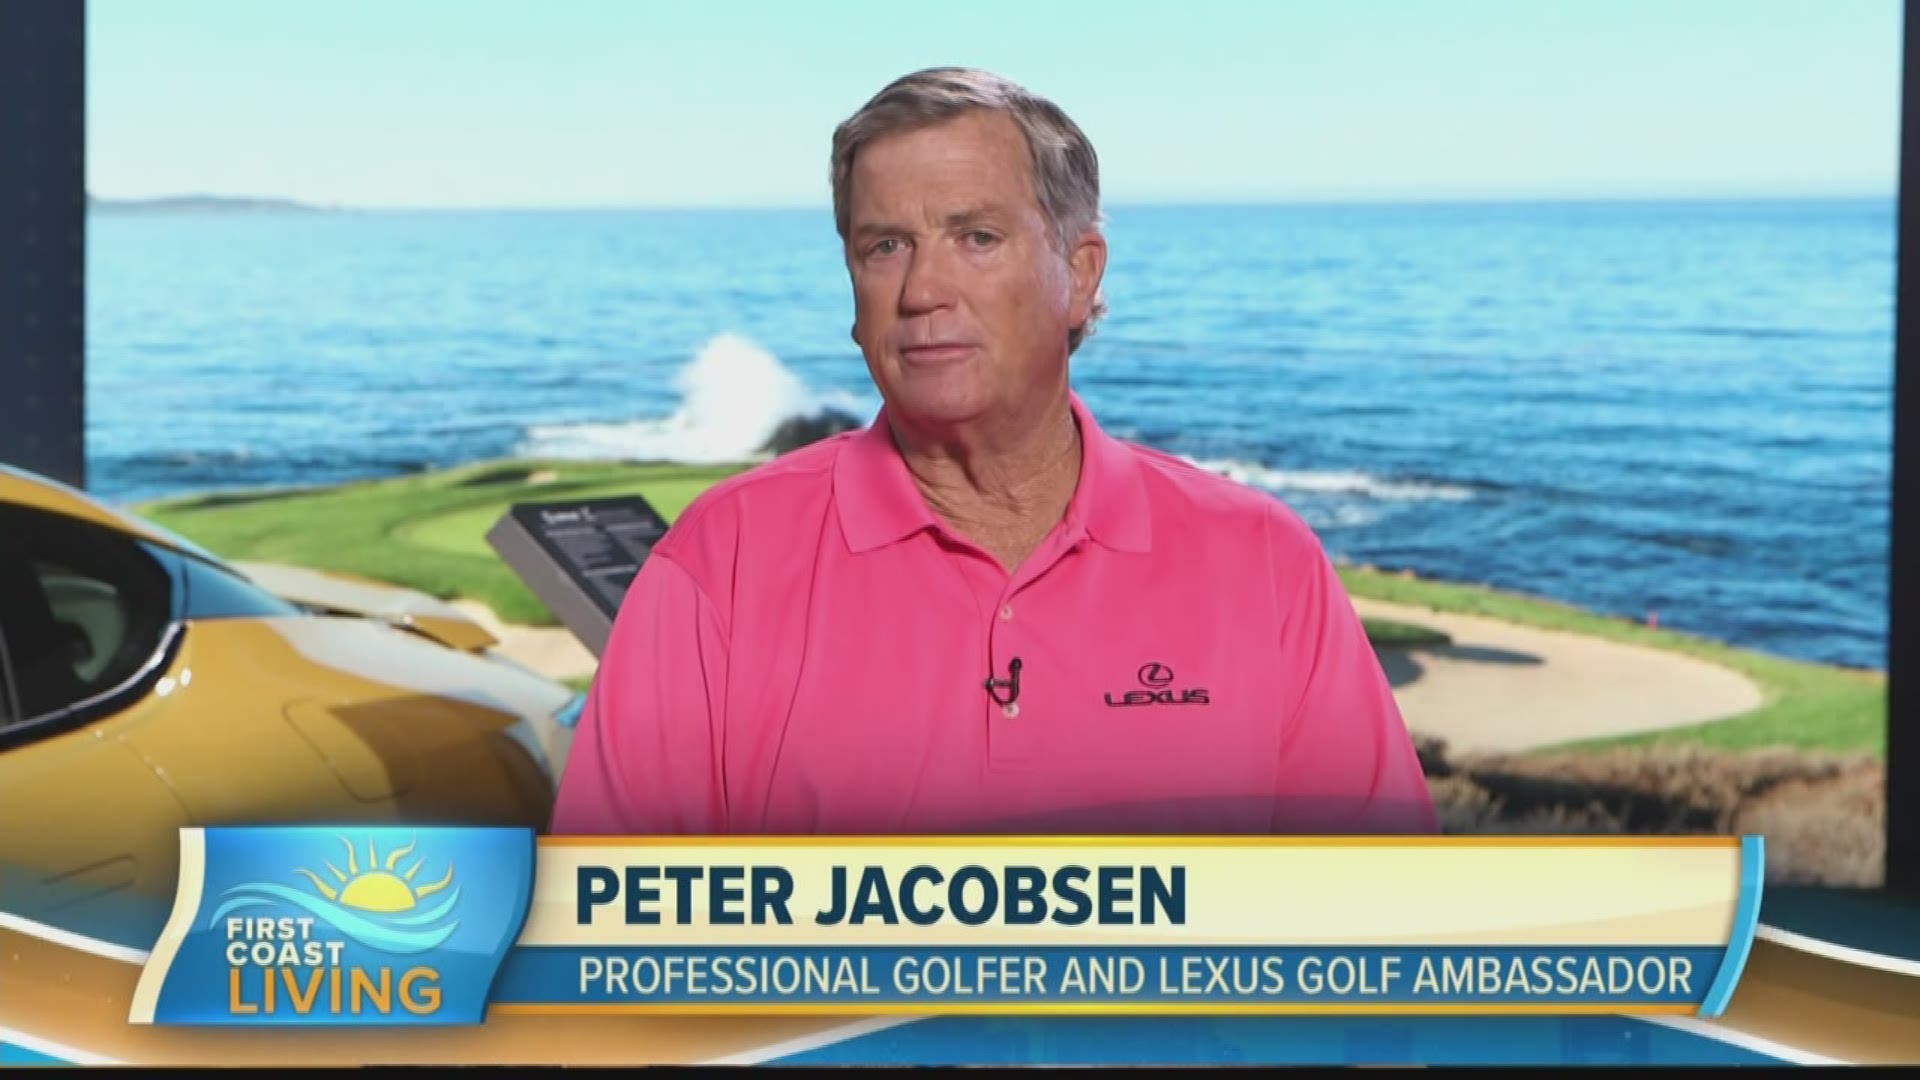 Professional golfer and analyst Peter Jacobsen shares insight on the 119th U.S. Open.